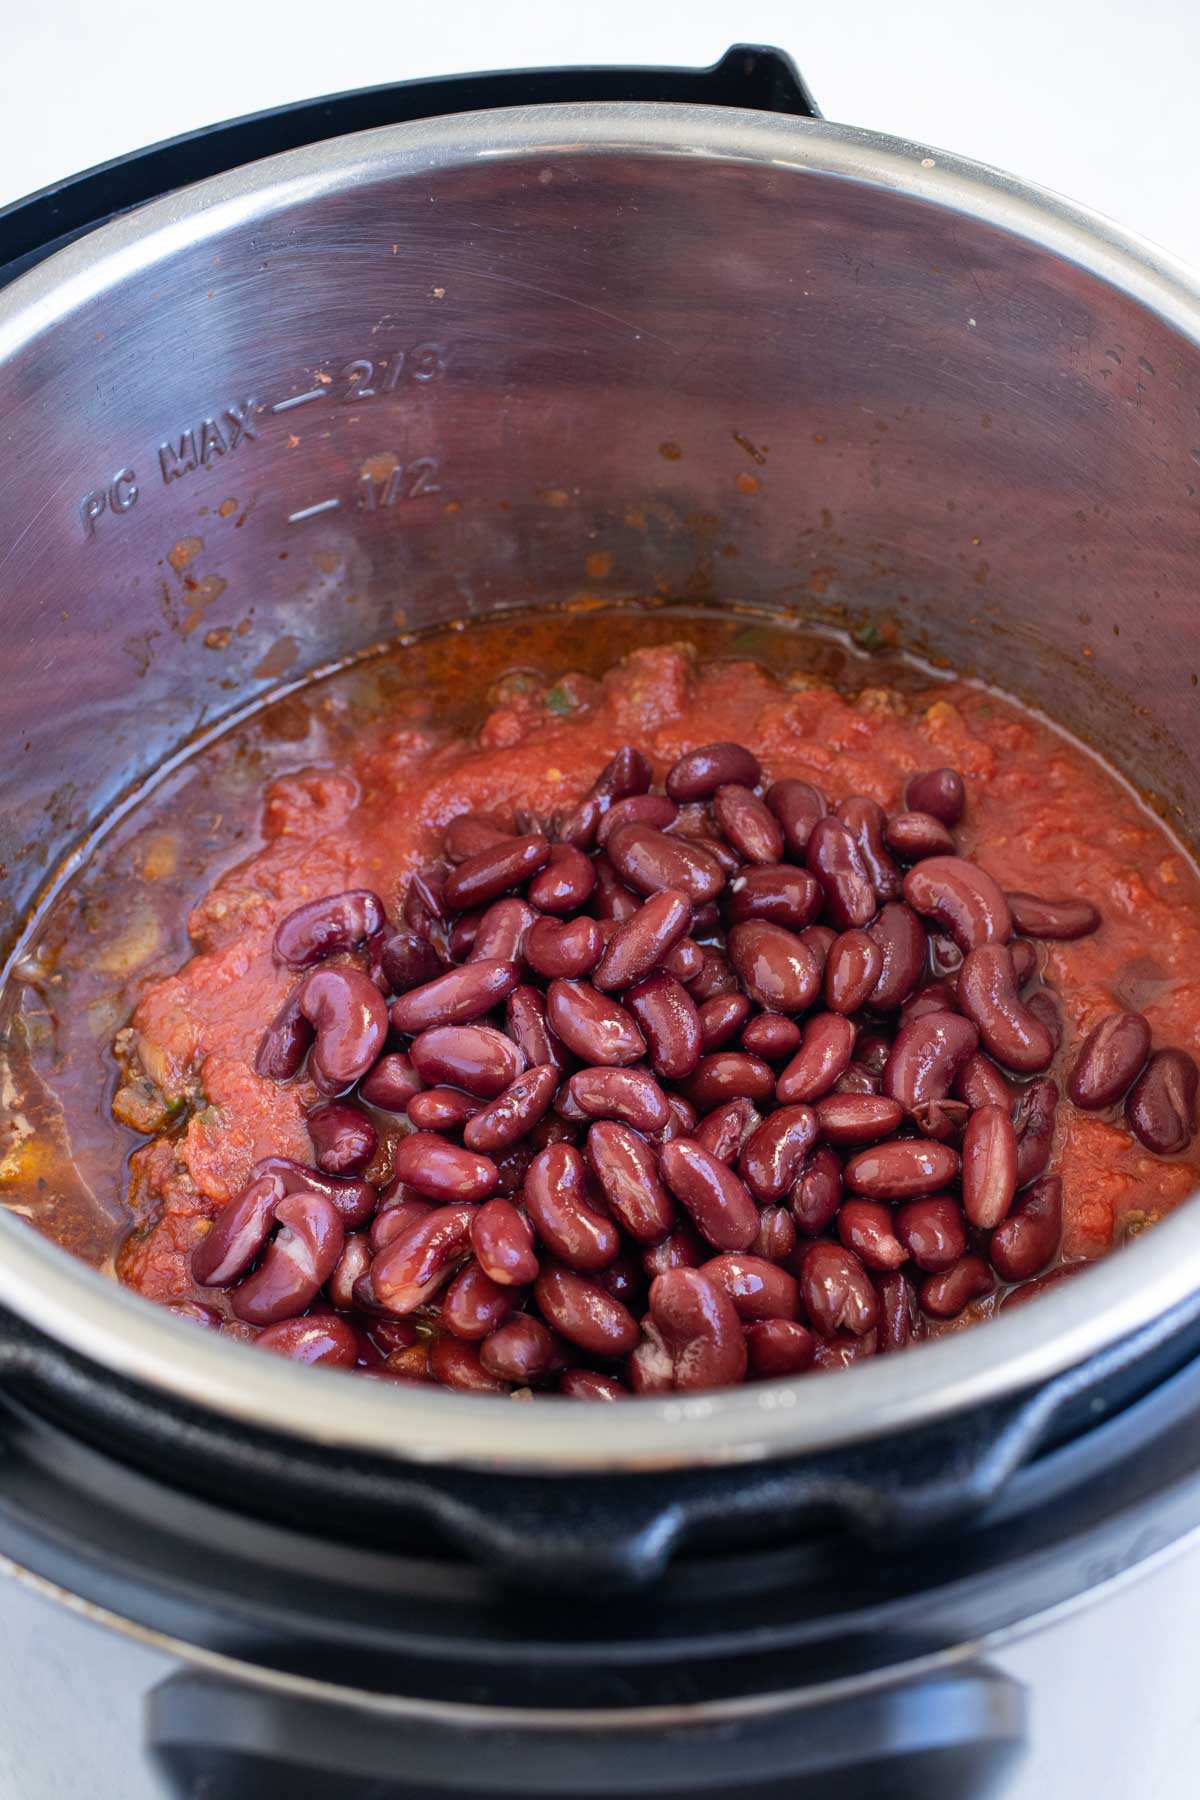 Beans are added to the chili mixture.